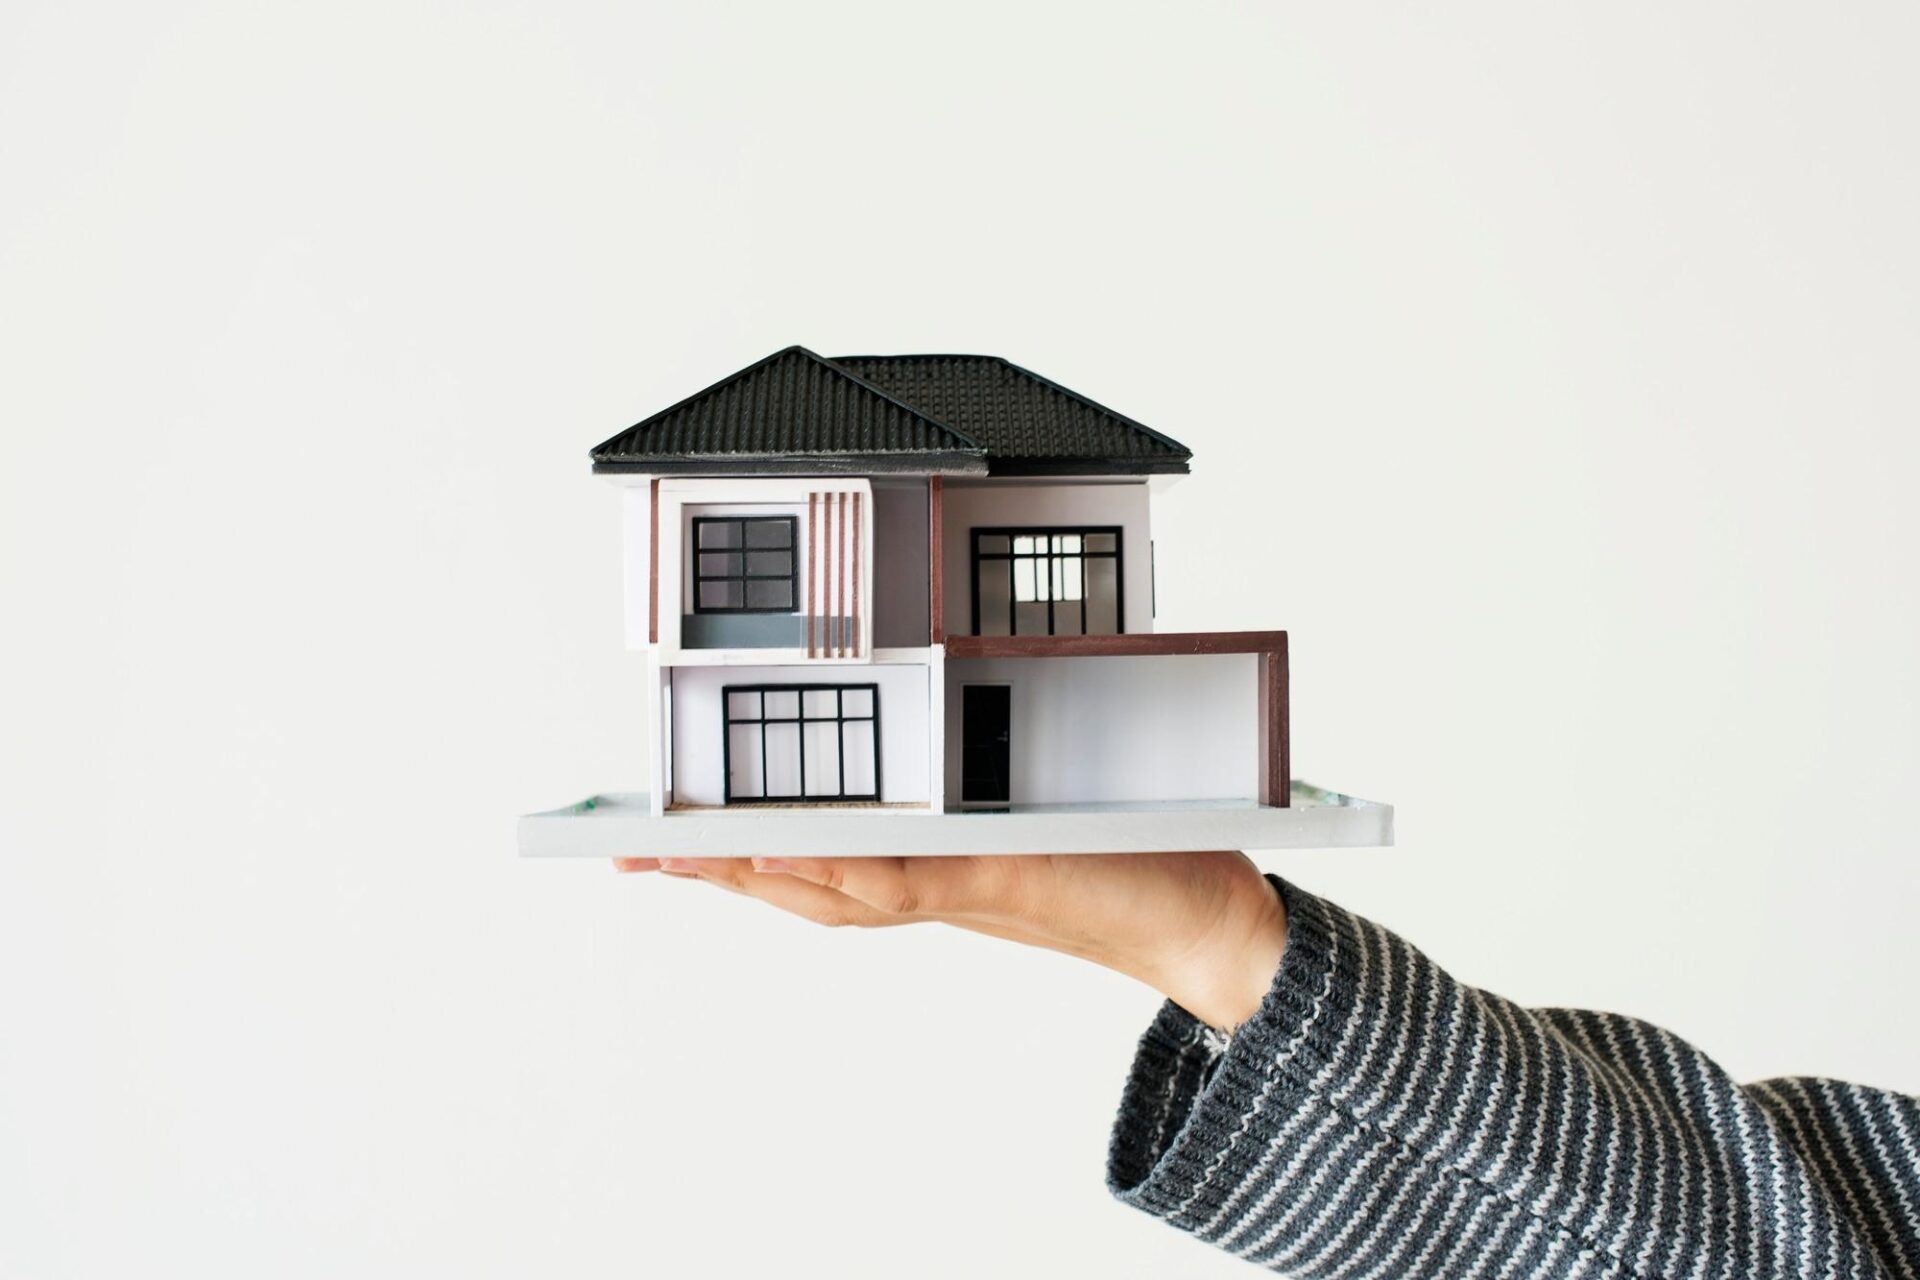 PropTech is helping the real estate to digitalise homebuying with the help of technology.